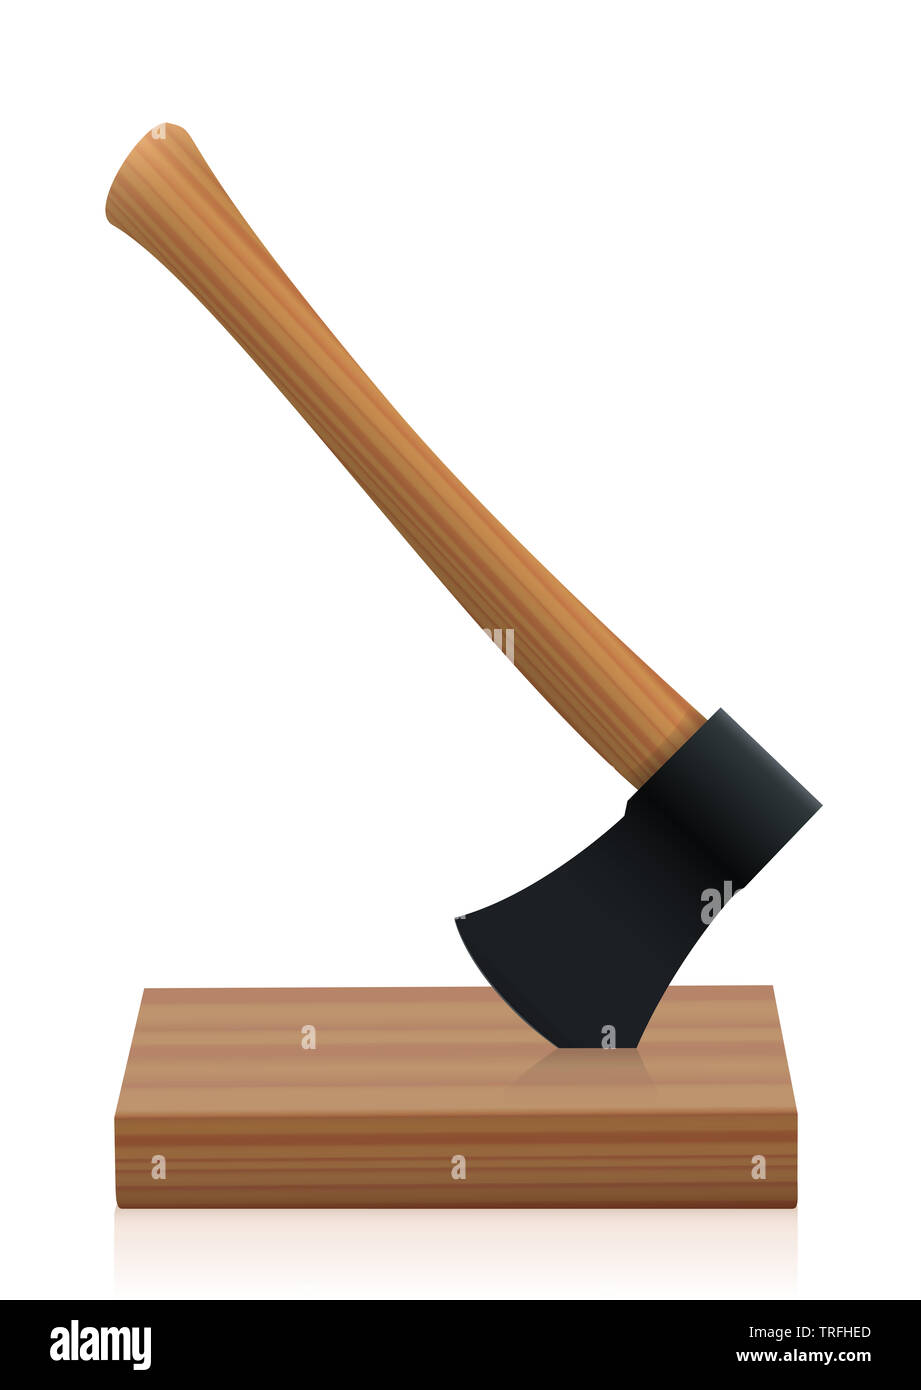 Axe with wooden handle and black head stuck in a board - illustration on white background. Stock Photo